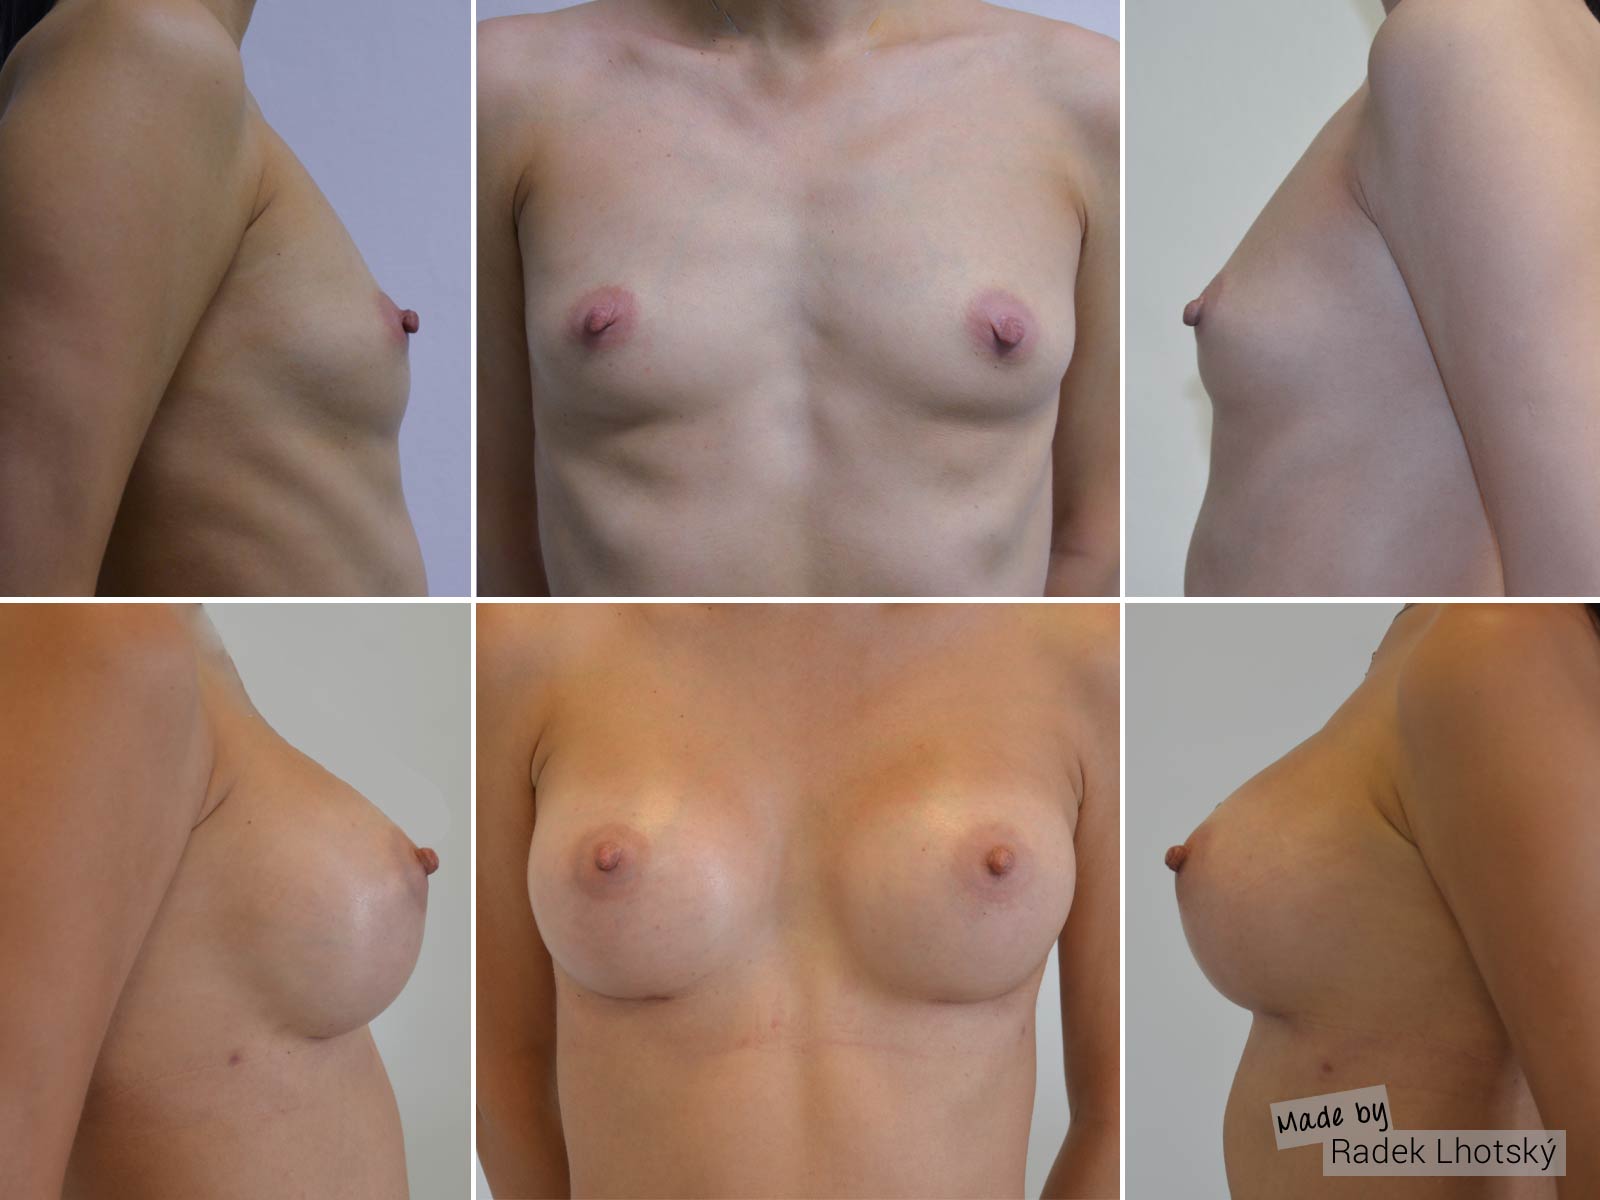 Before after picture - Breast augmentation, anatomic implant, 345 cc, Dr. Radek Lhostky